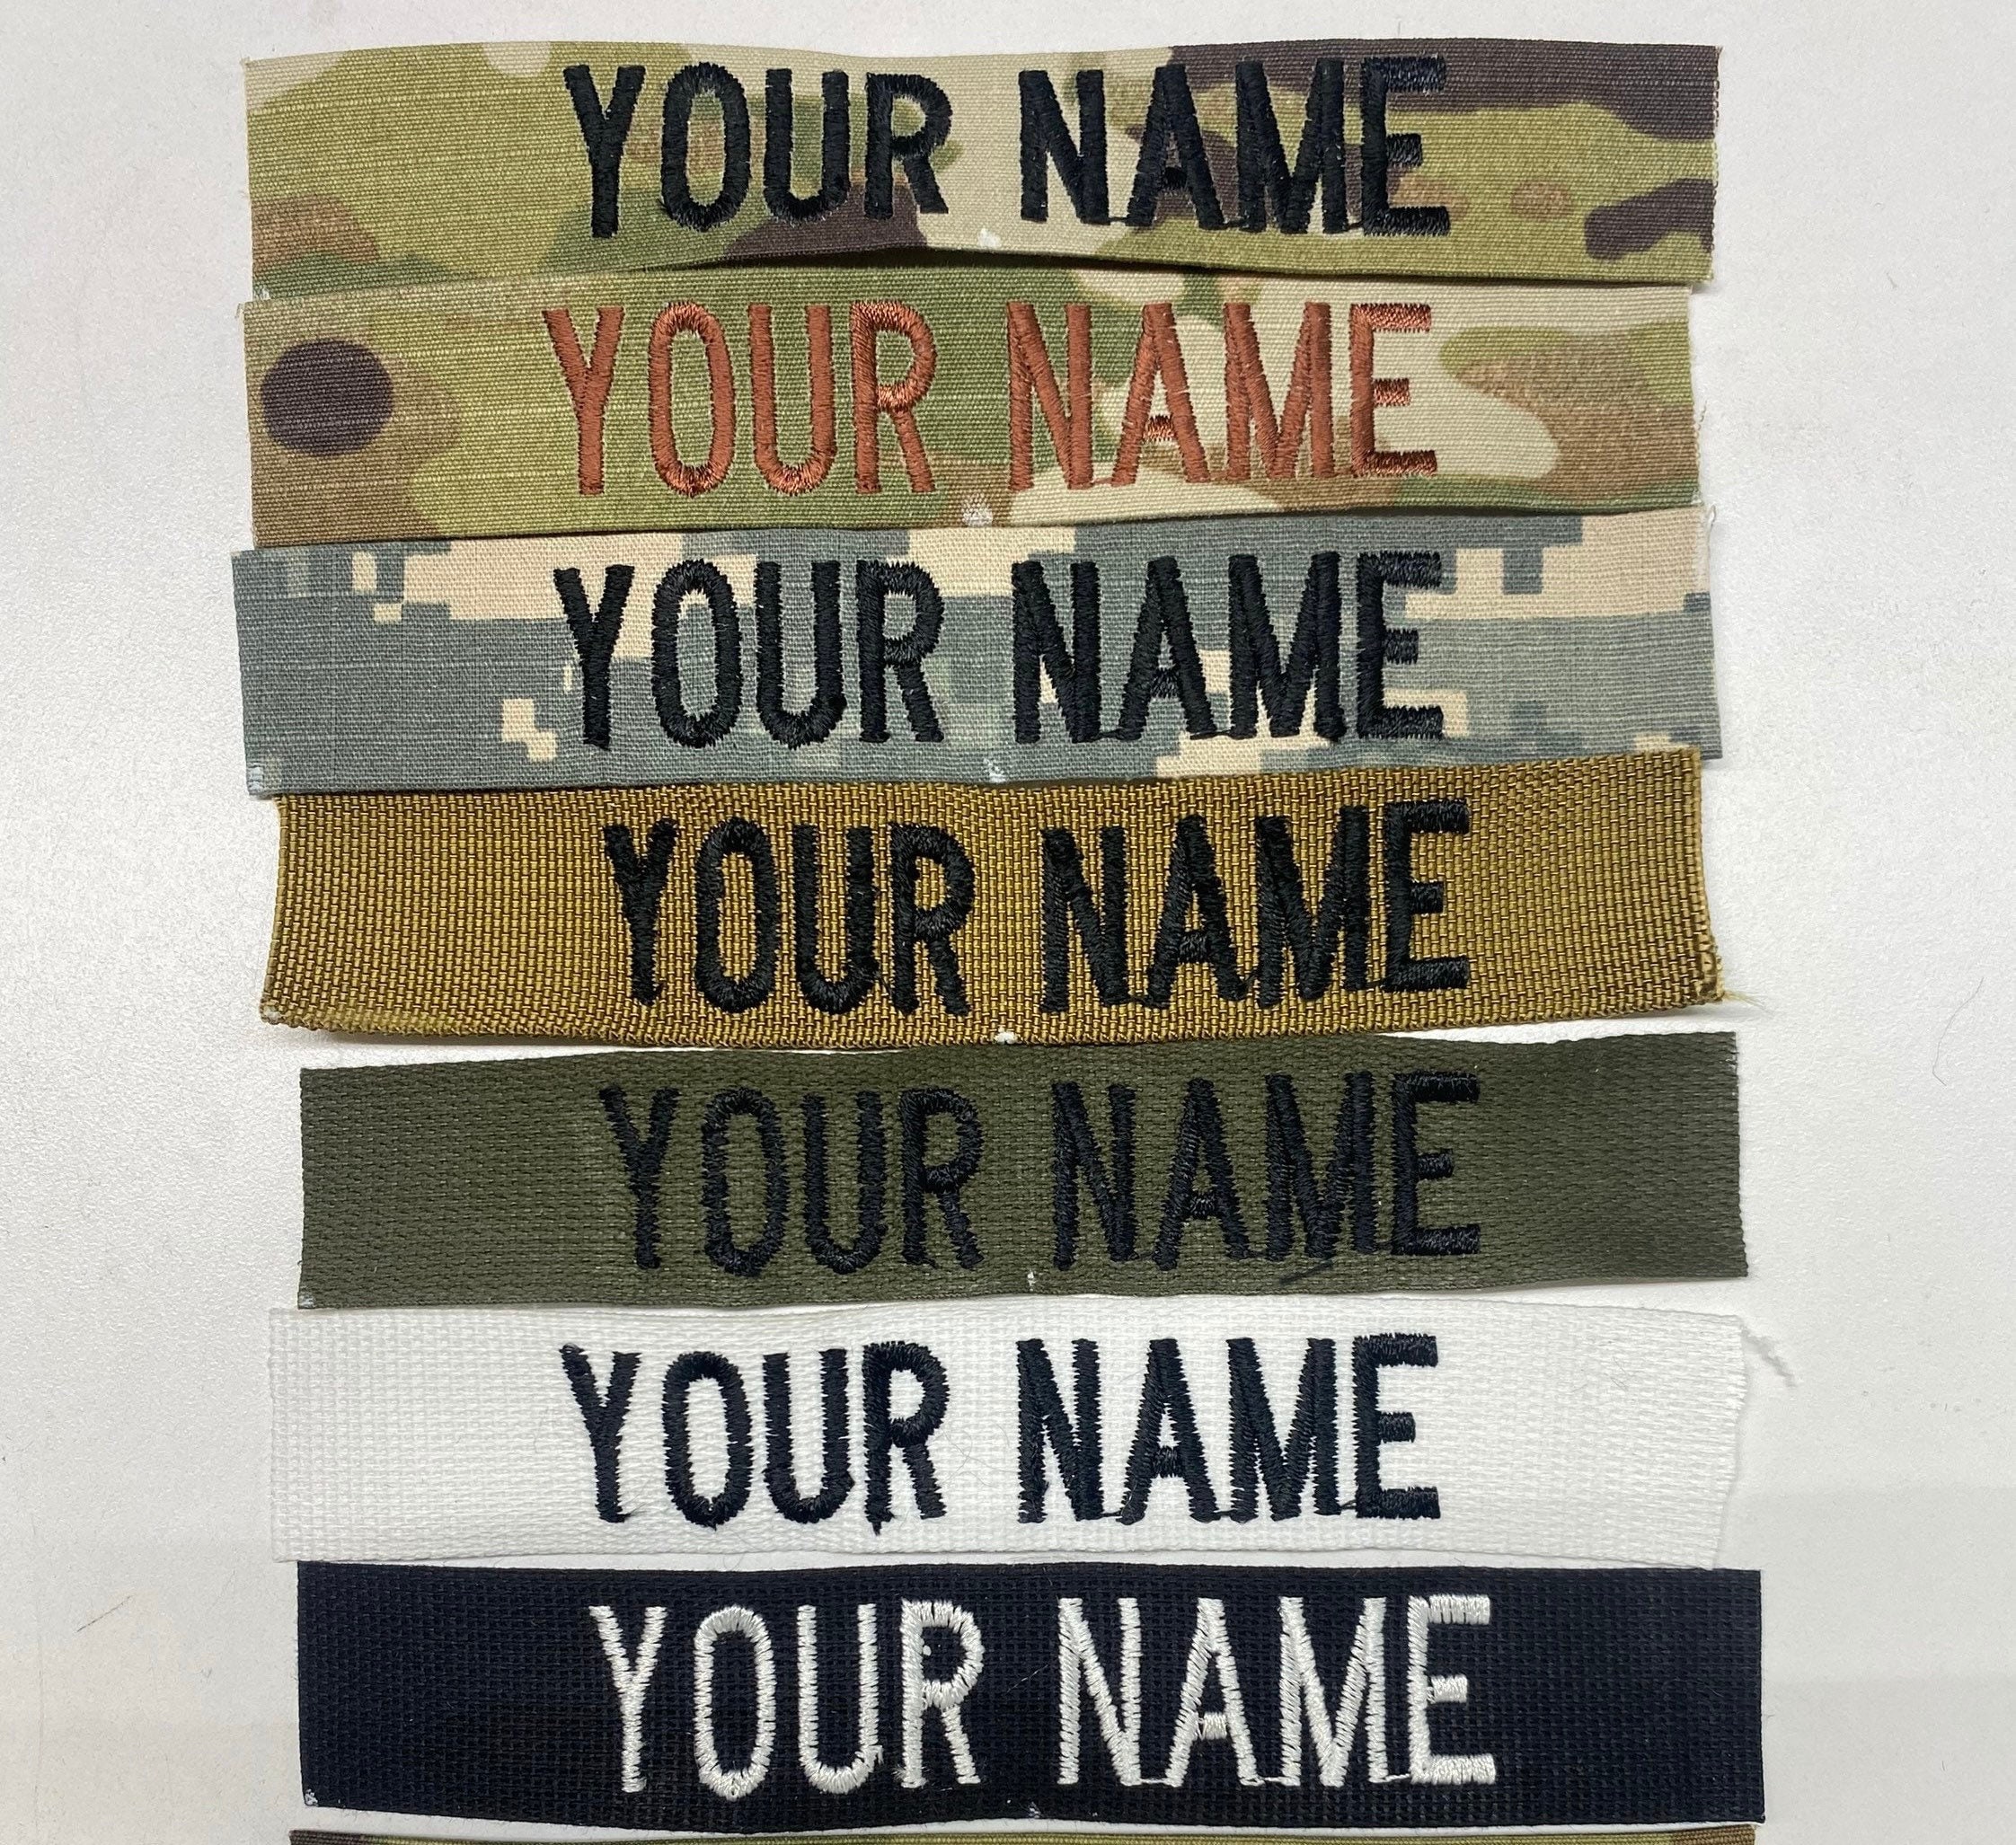 Coast Guard Name Tape: Individual - Name Embroidered on Blue Ripstop